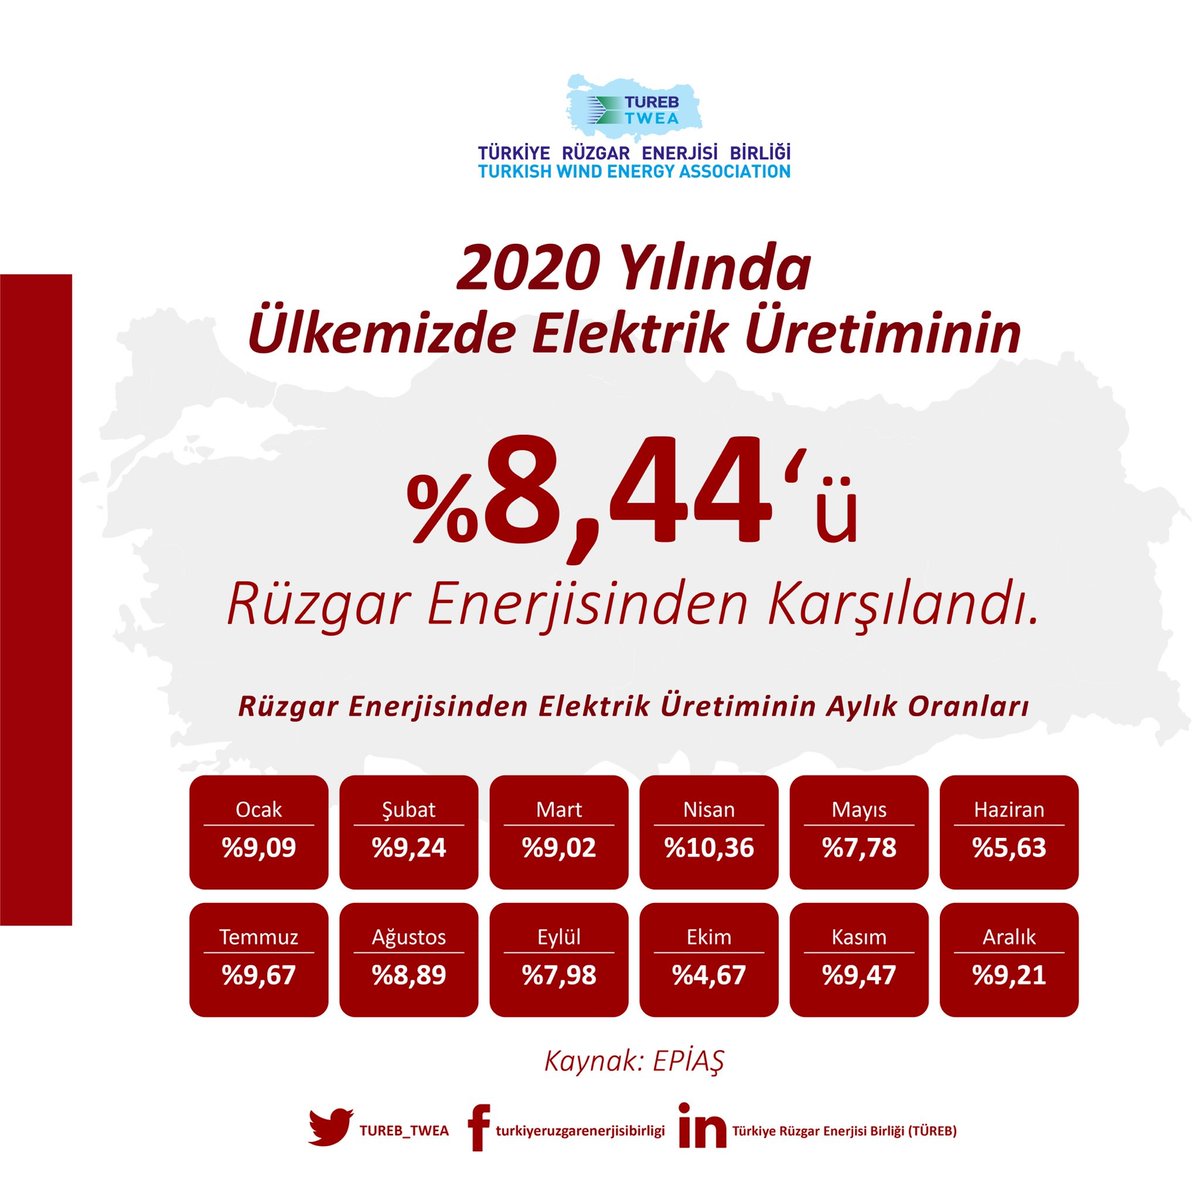 In 2020, 8.44% of Turkey's total electricity generation came from wind. (even without any offshore wind power generation yet.)  #TÜREB  #Windpower  #Renewables  #TurKEYforEnergy